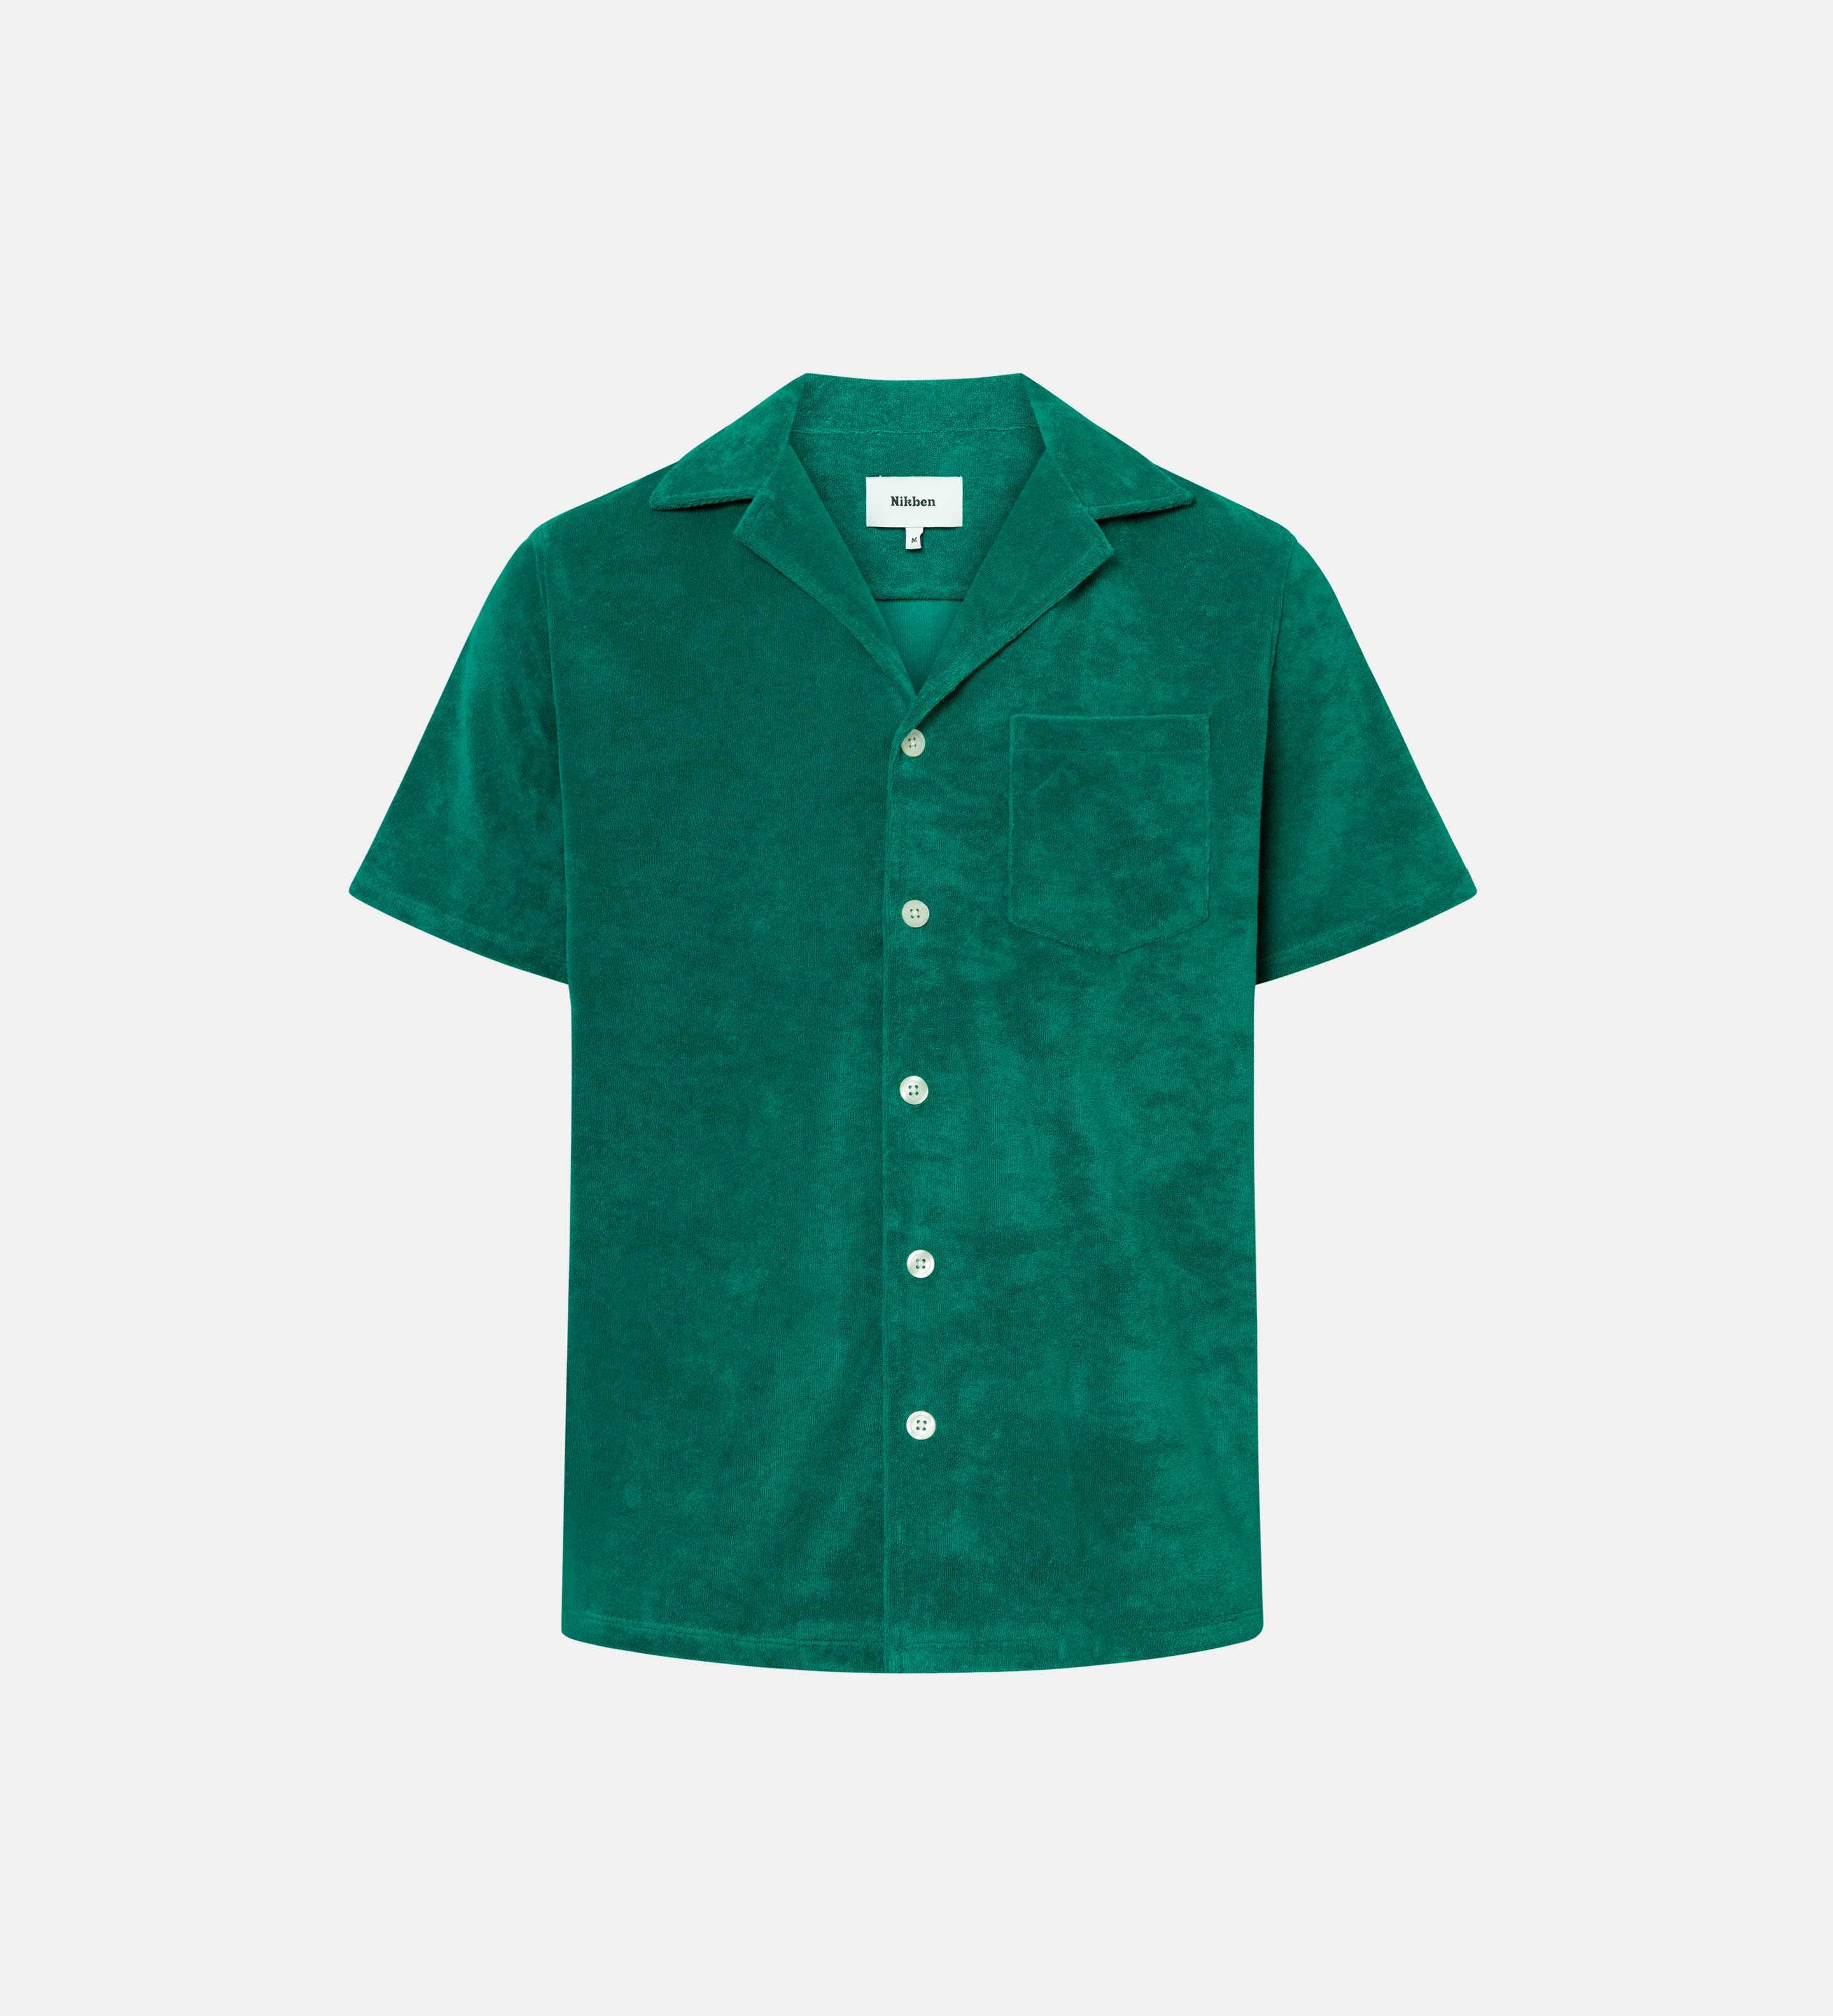 Green short sleeve shirt with white button closure and one chest pocket